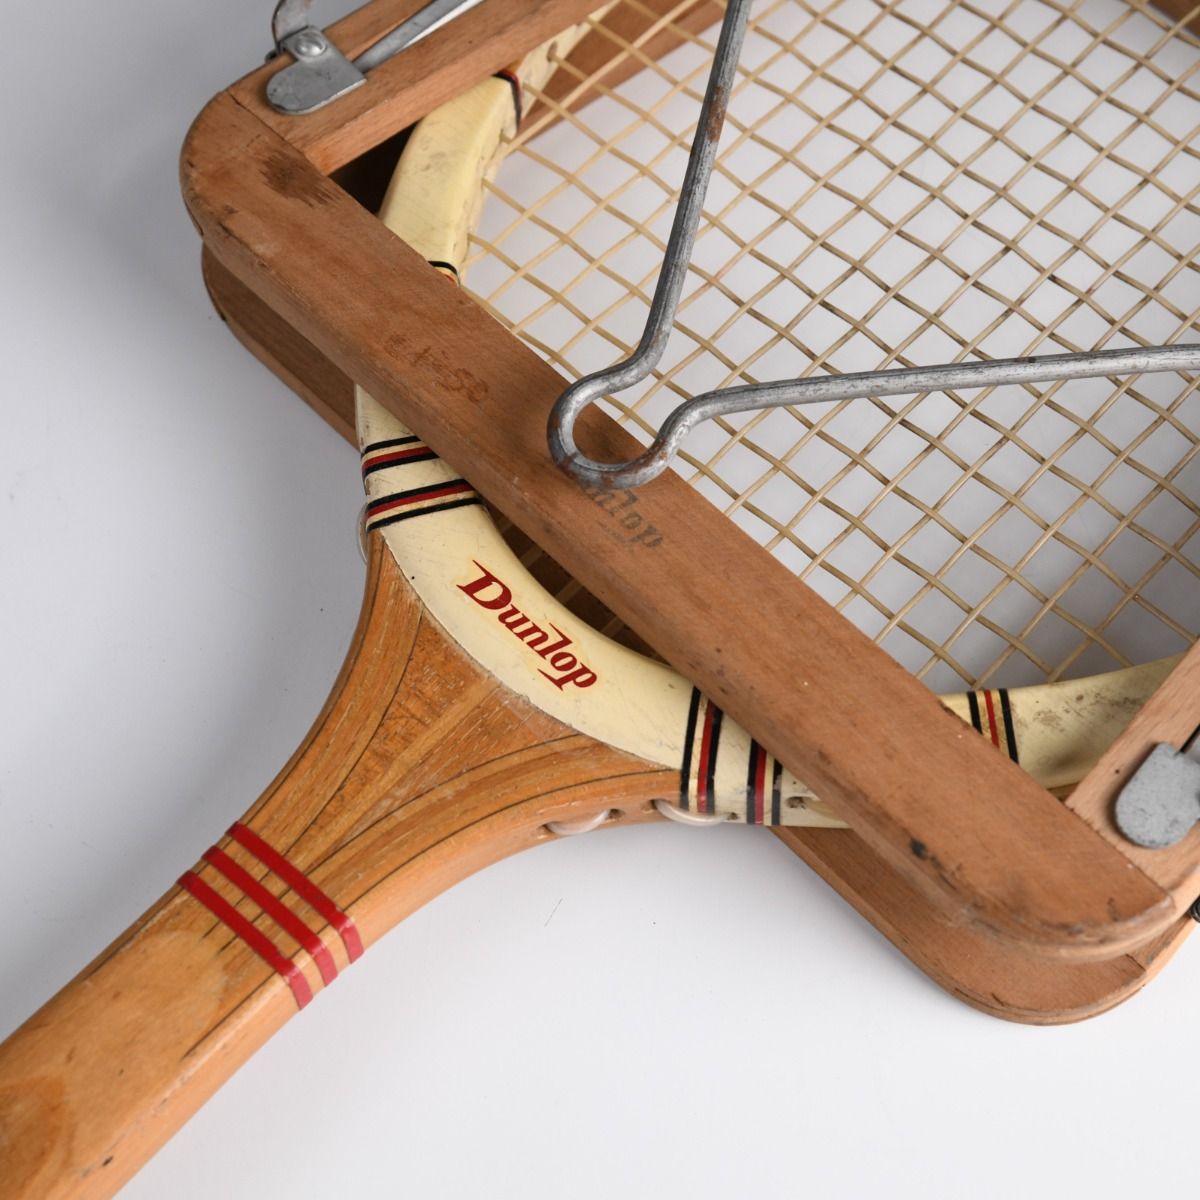 Vintage 1970s Dunlop Maxply Fort Wooden Squash Racket With Press